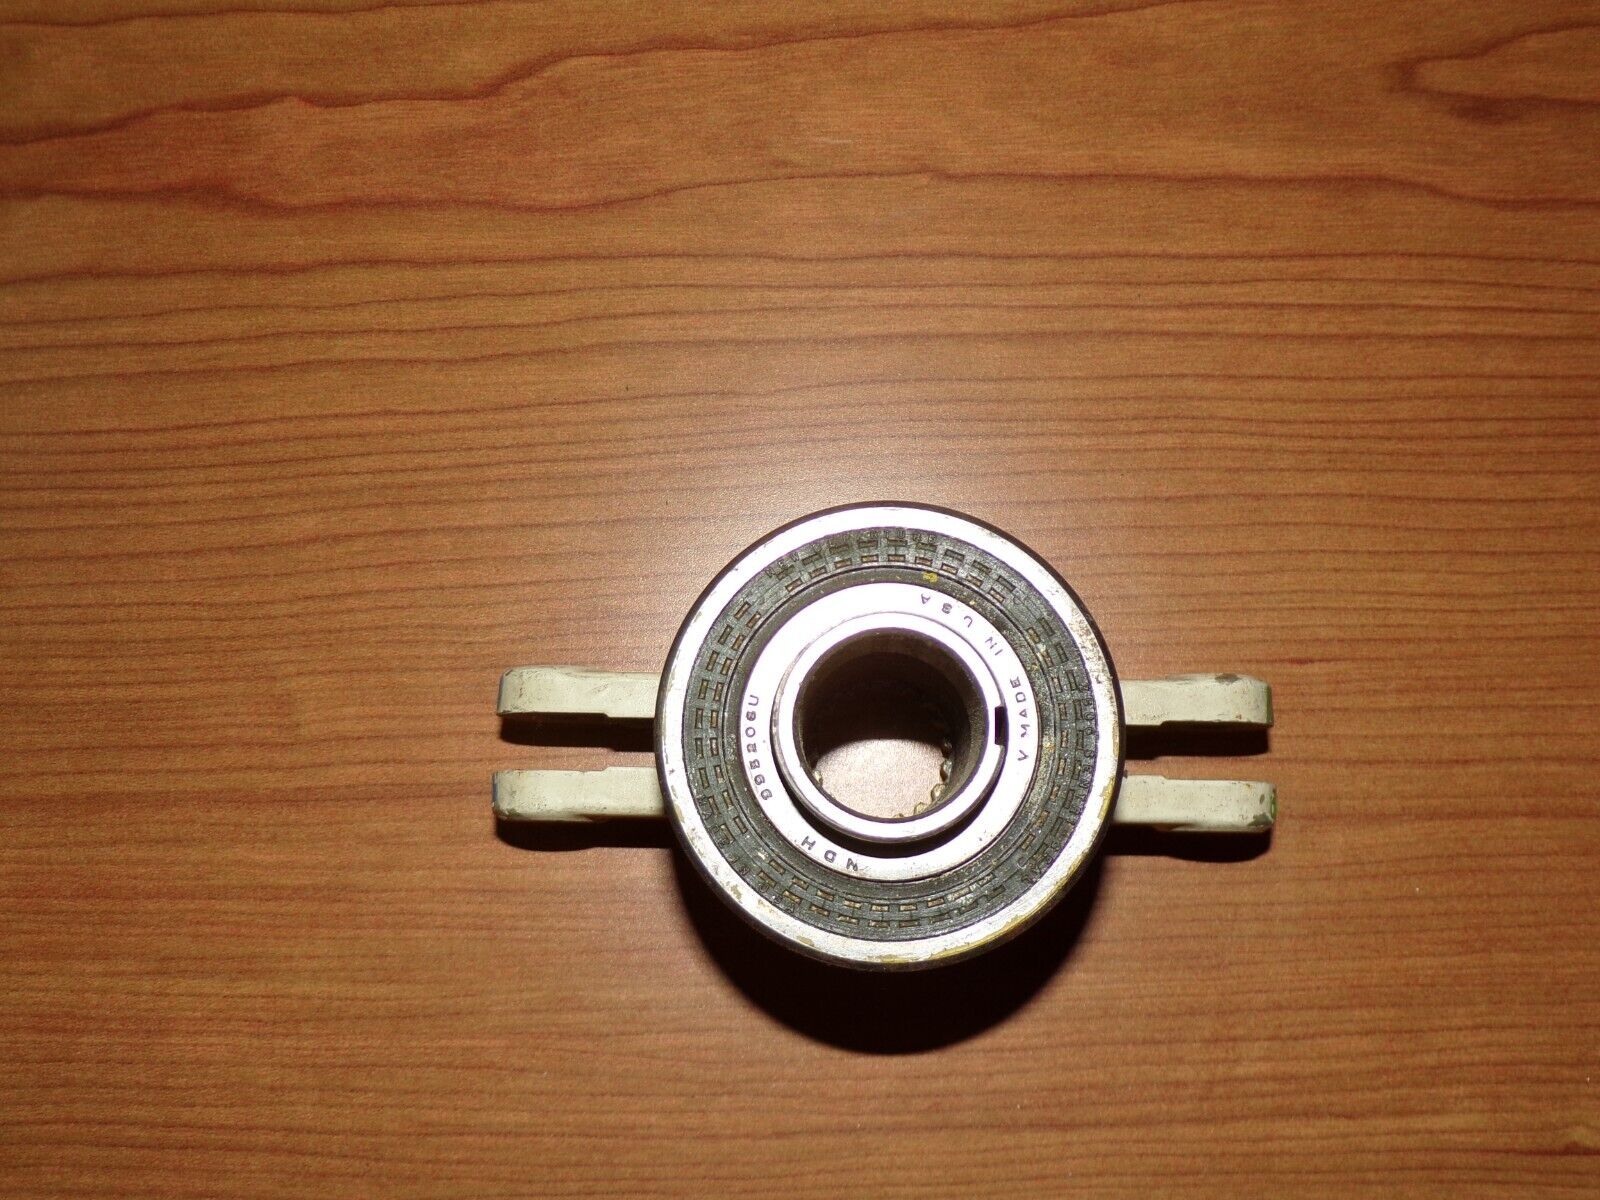 Hughes 369 Helicopter Bearing Gear Link